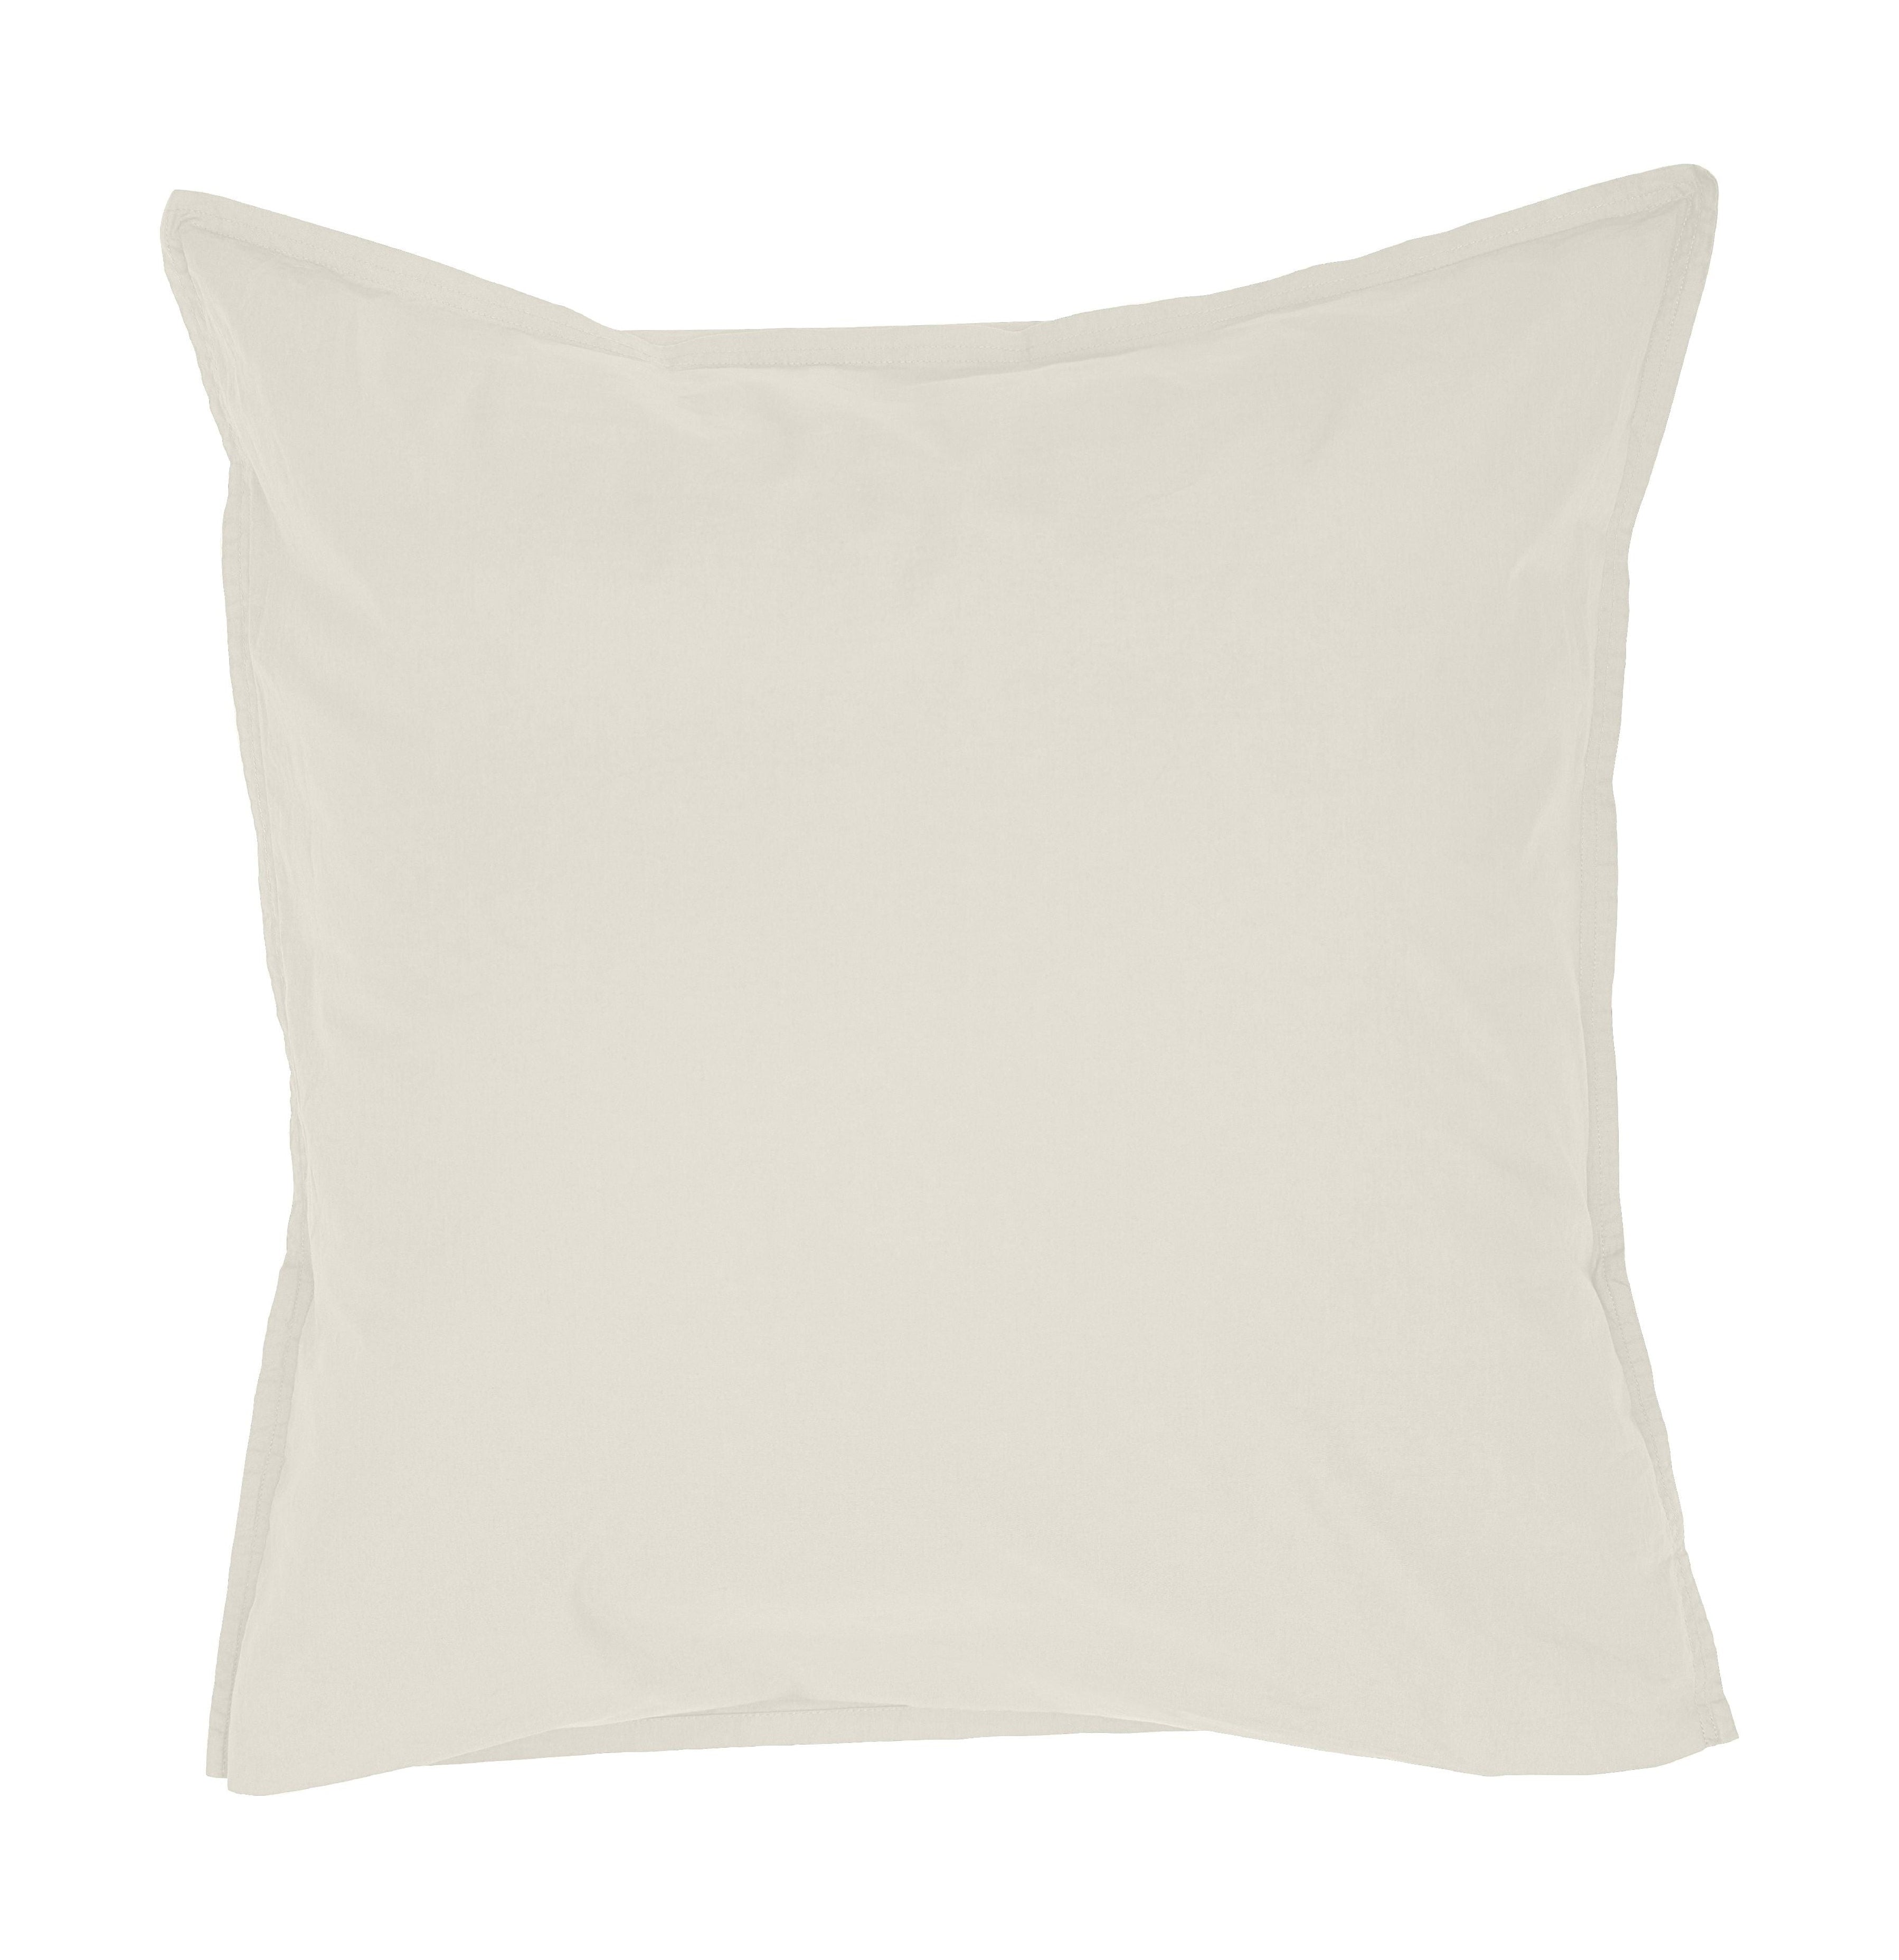 Door Nord Ingrid Cushion Cover 80x80 cm, shell